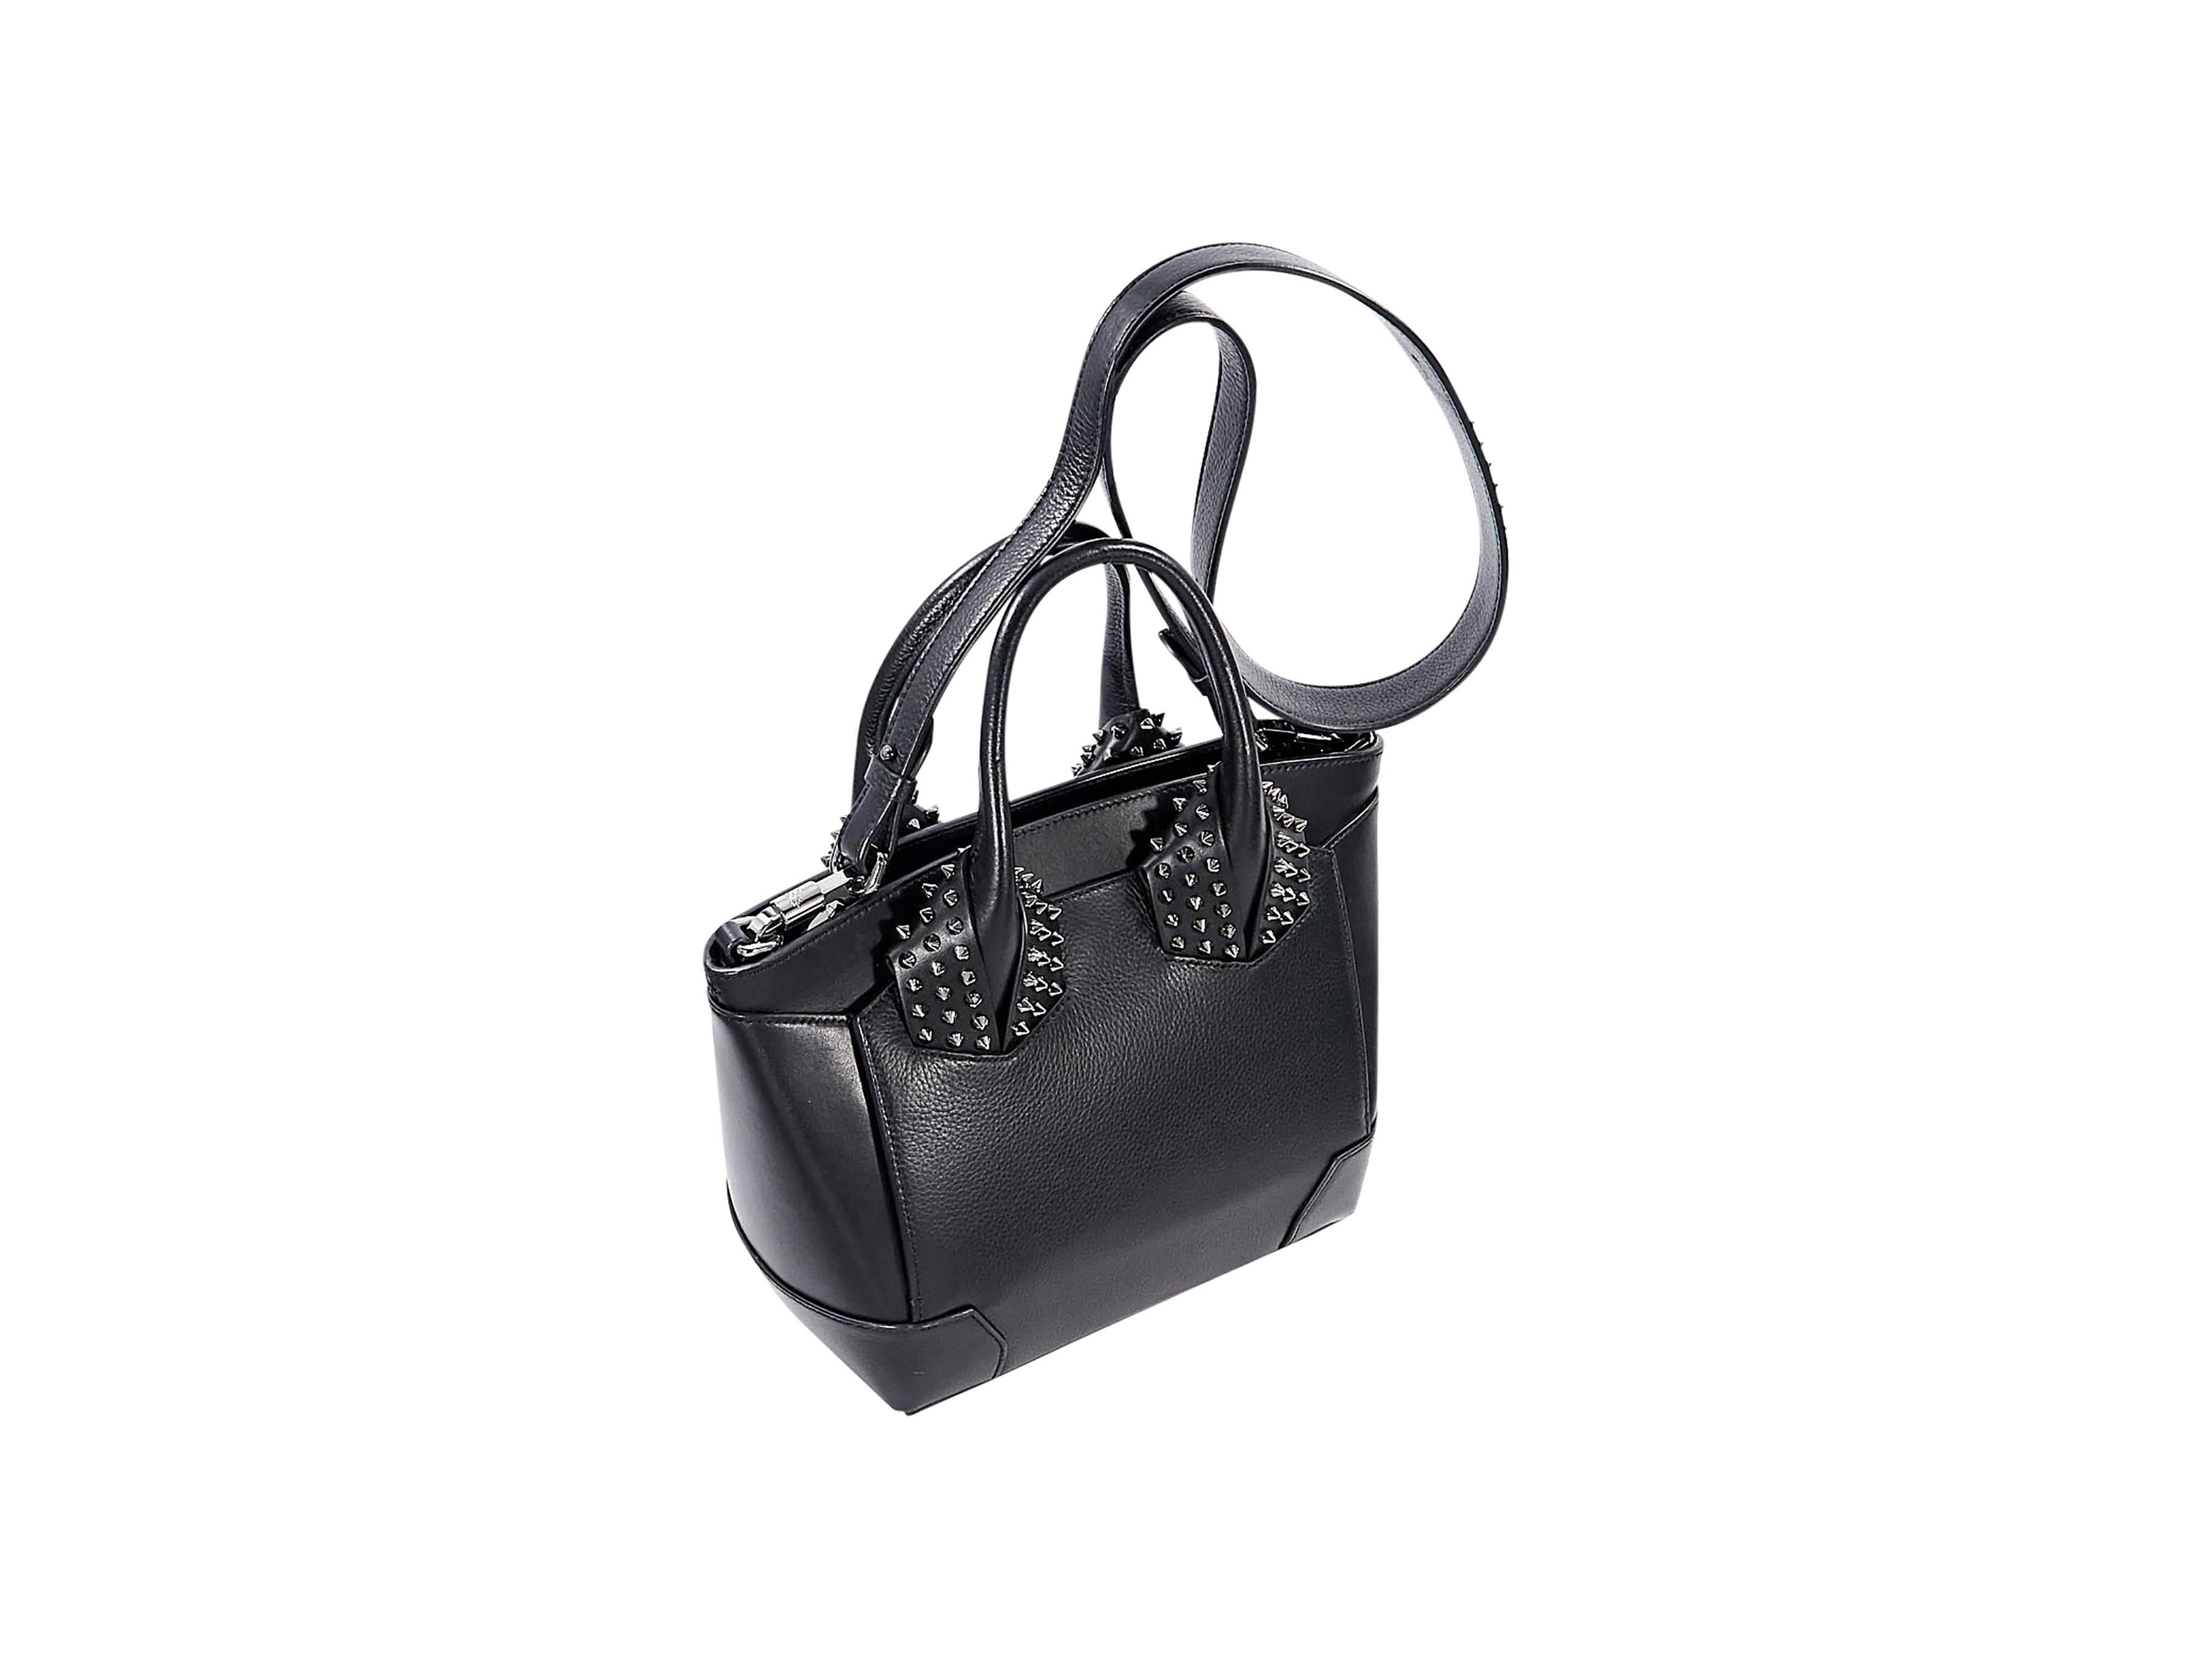 Product details:  Black leather studded Elouise satchel by Christian Louboutin.  Dual carry handles.  Detachable crossbody strap.  Center top zip compartment and two side open compartments.  Lined interior with inner zip pocket.  Protective metal